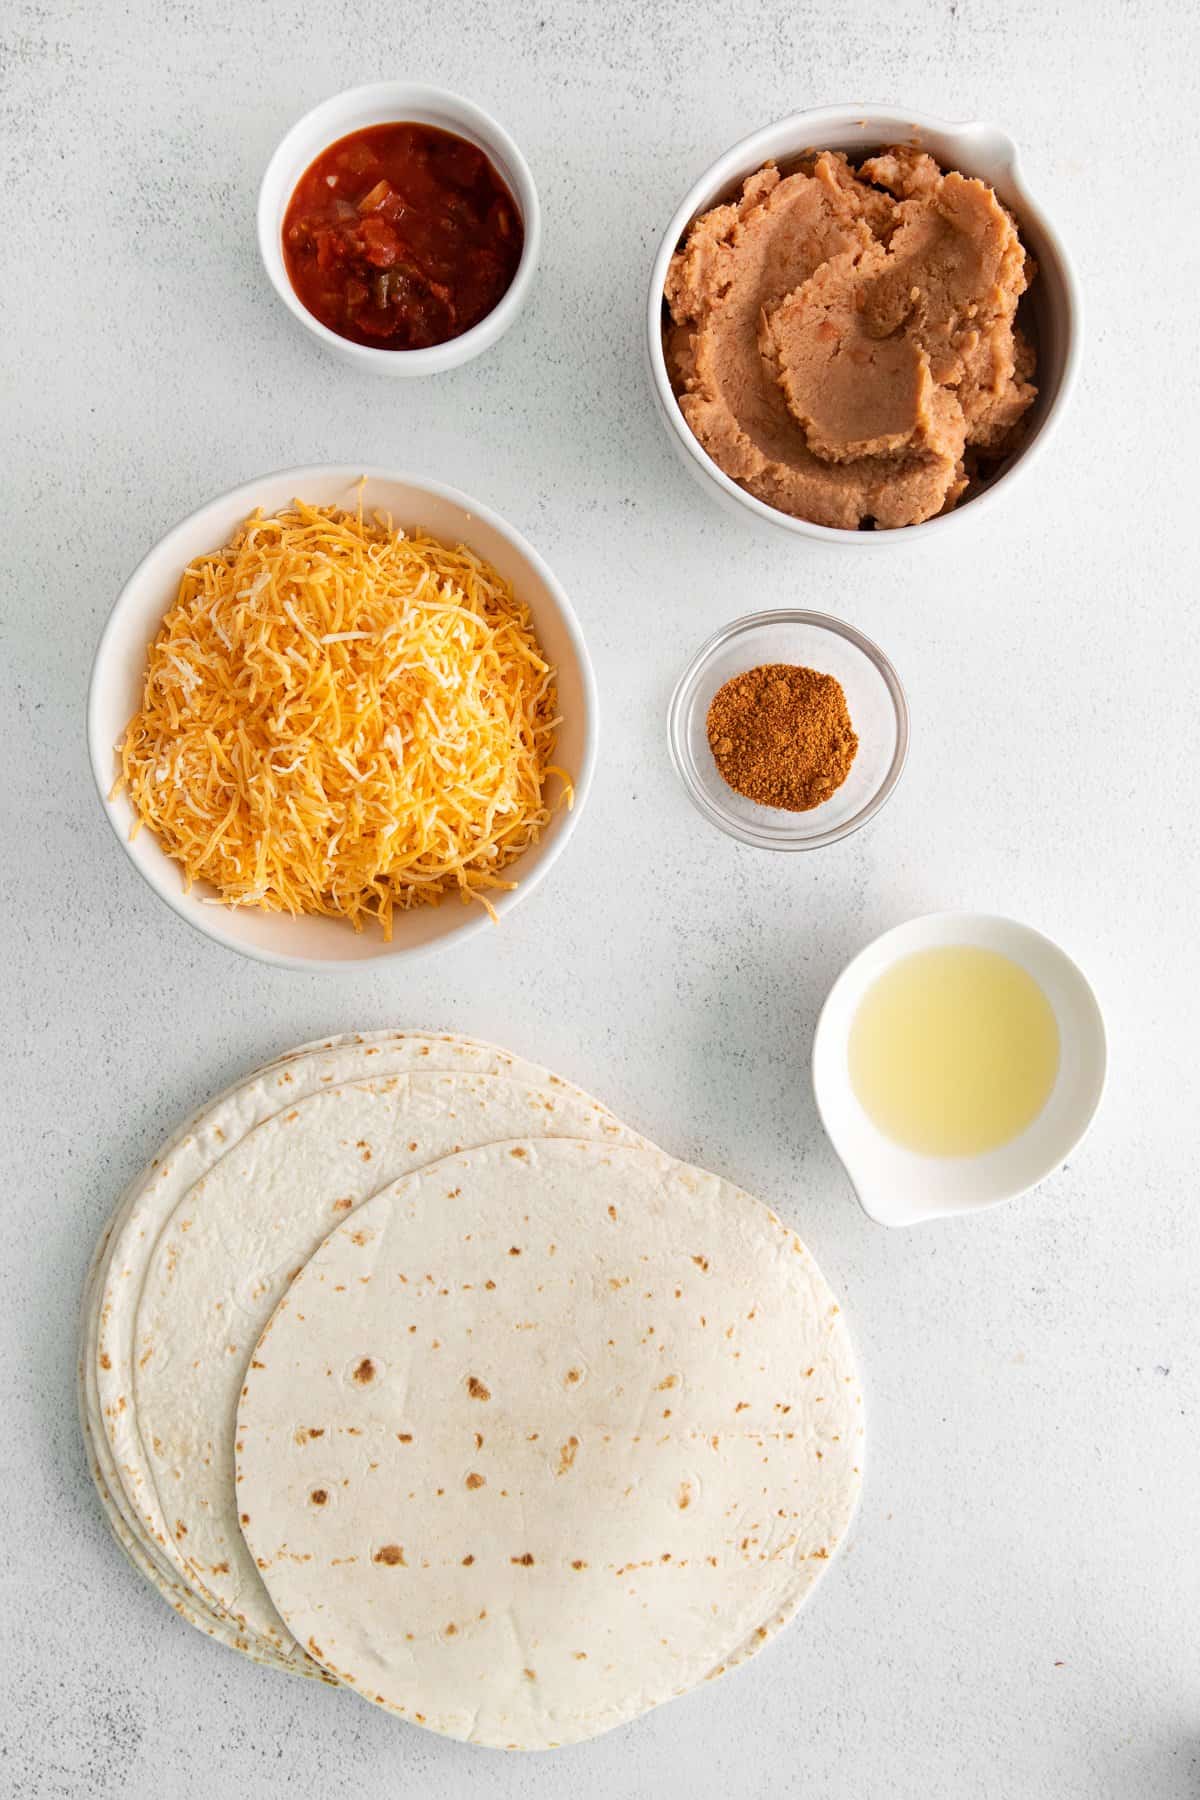 Ingredients for bean and cheese burritos in bowls.